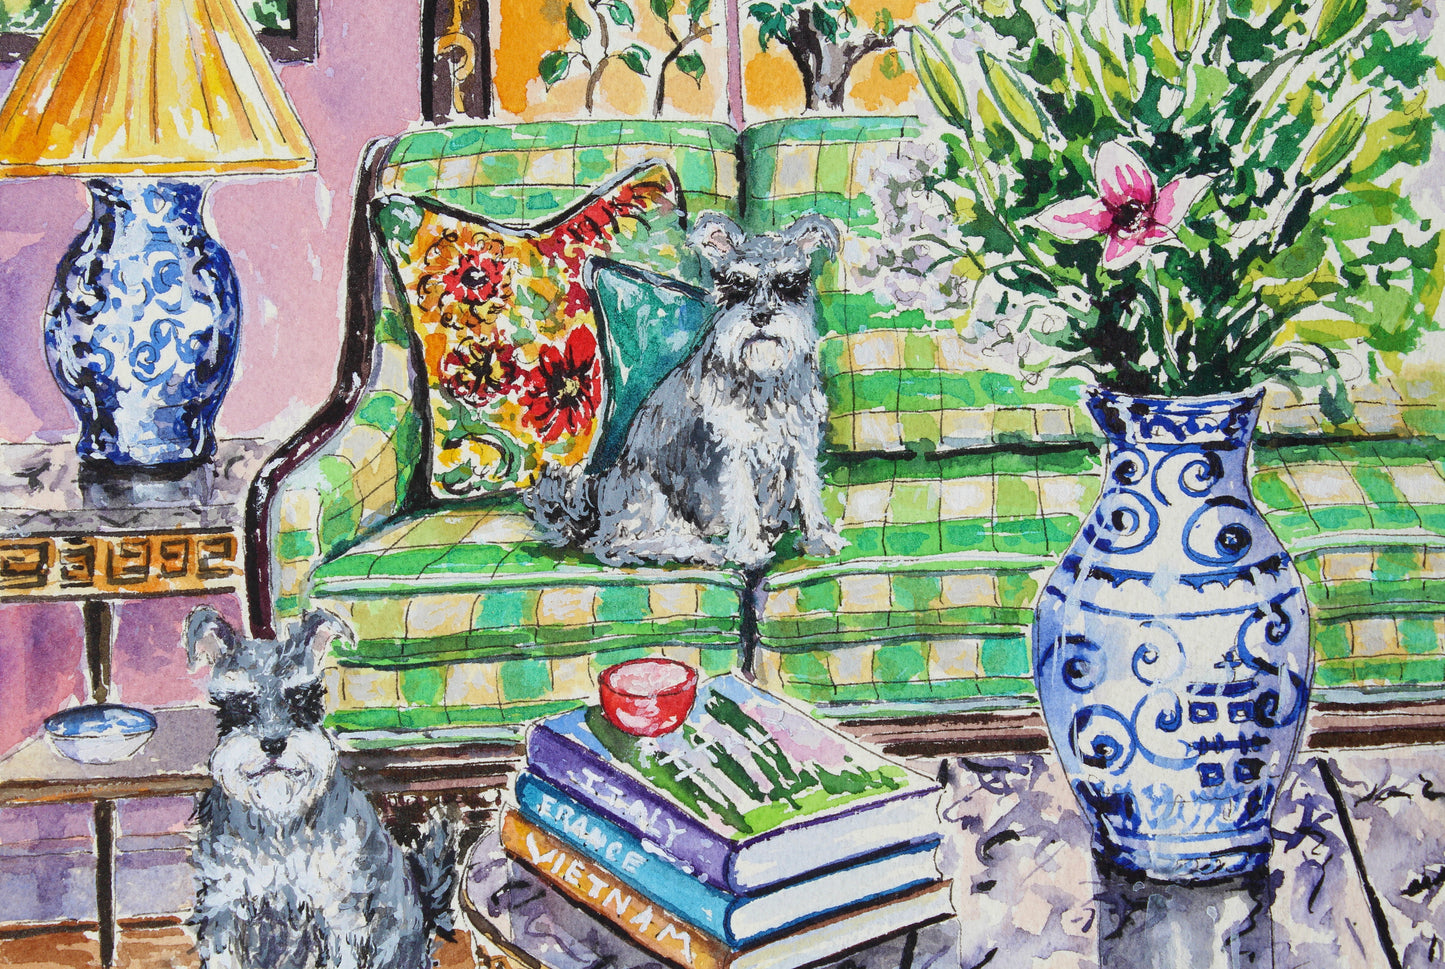 An original watercolor painting of 2 schnauzer dogs in an interior setting, The Schnauzers